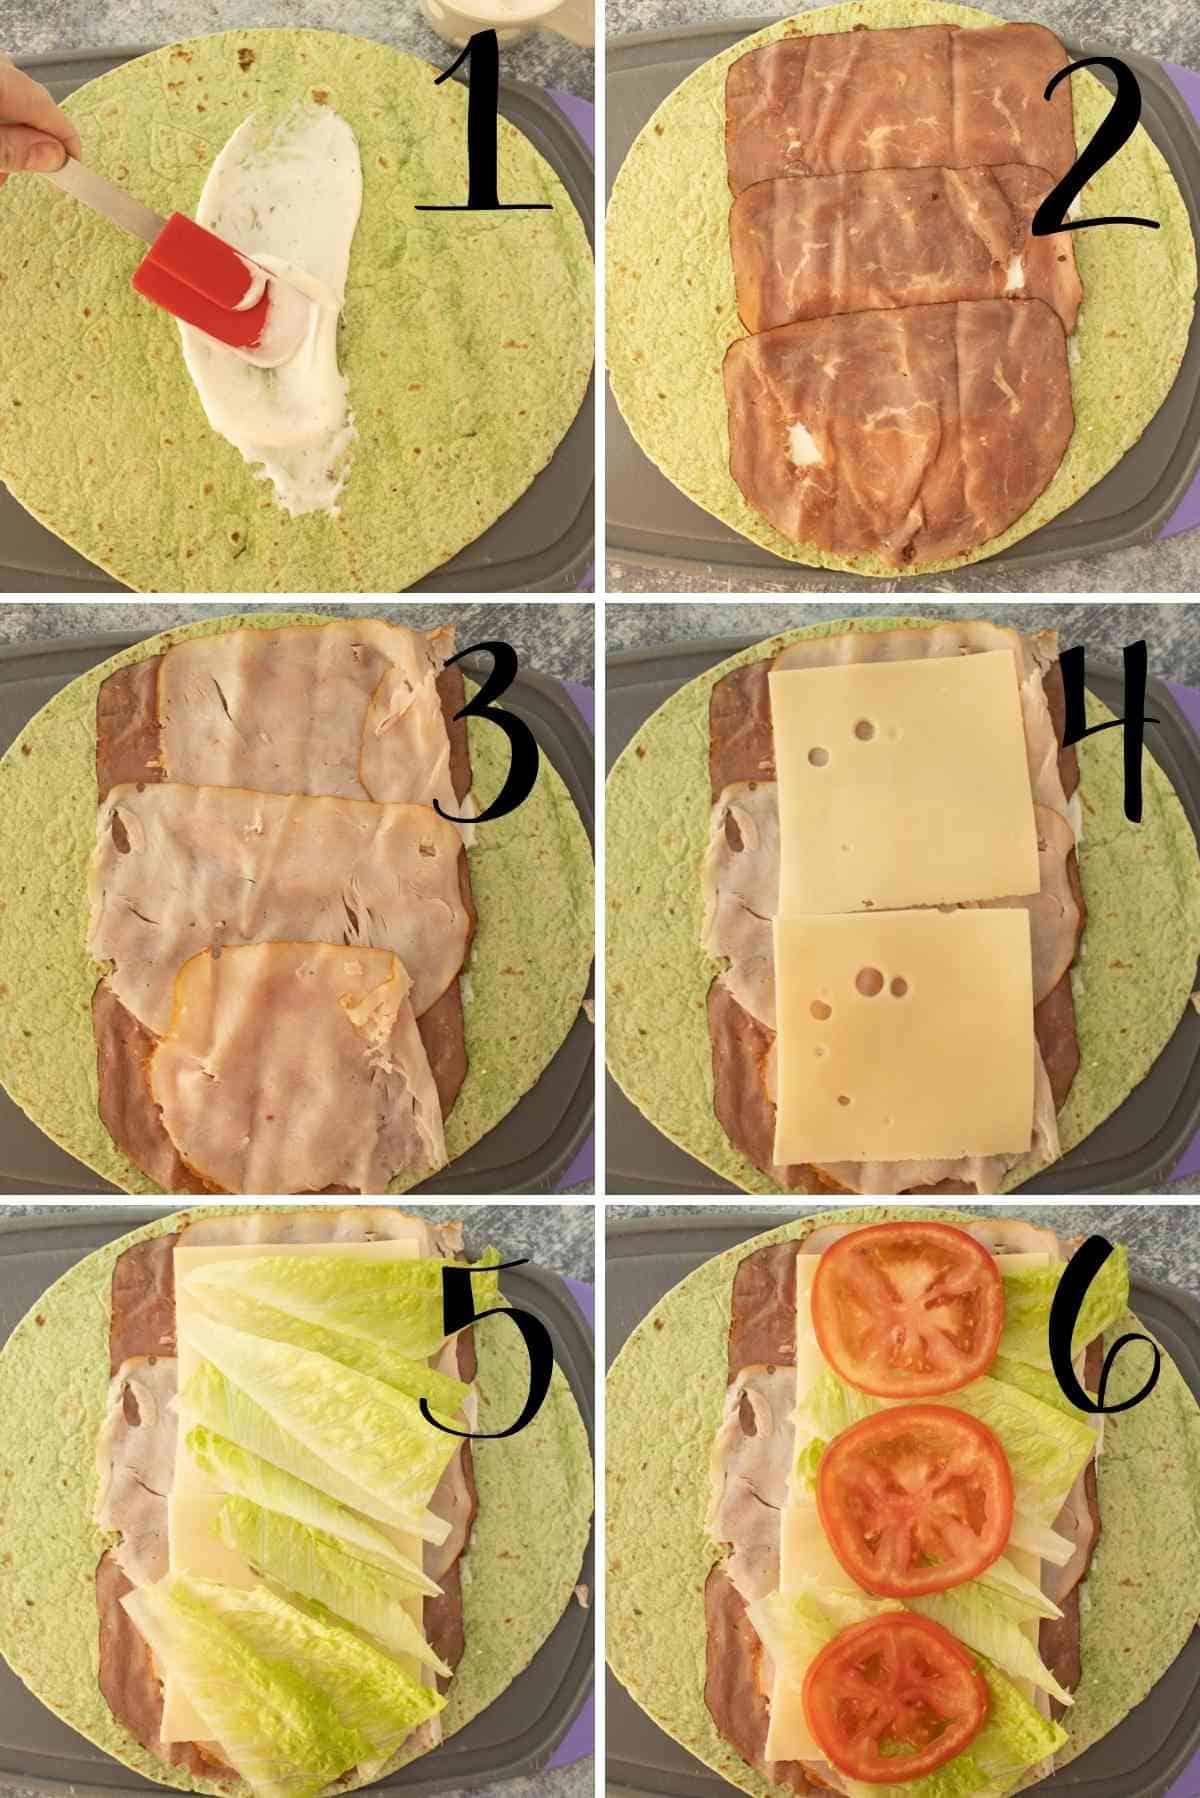 First 6 steps to making these wraps.